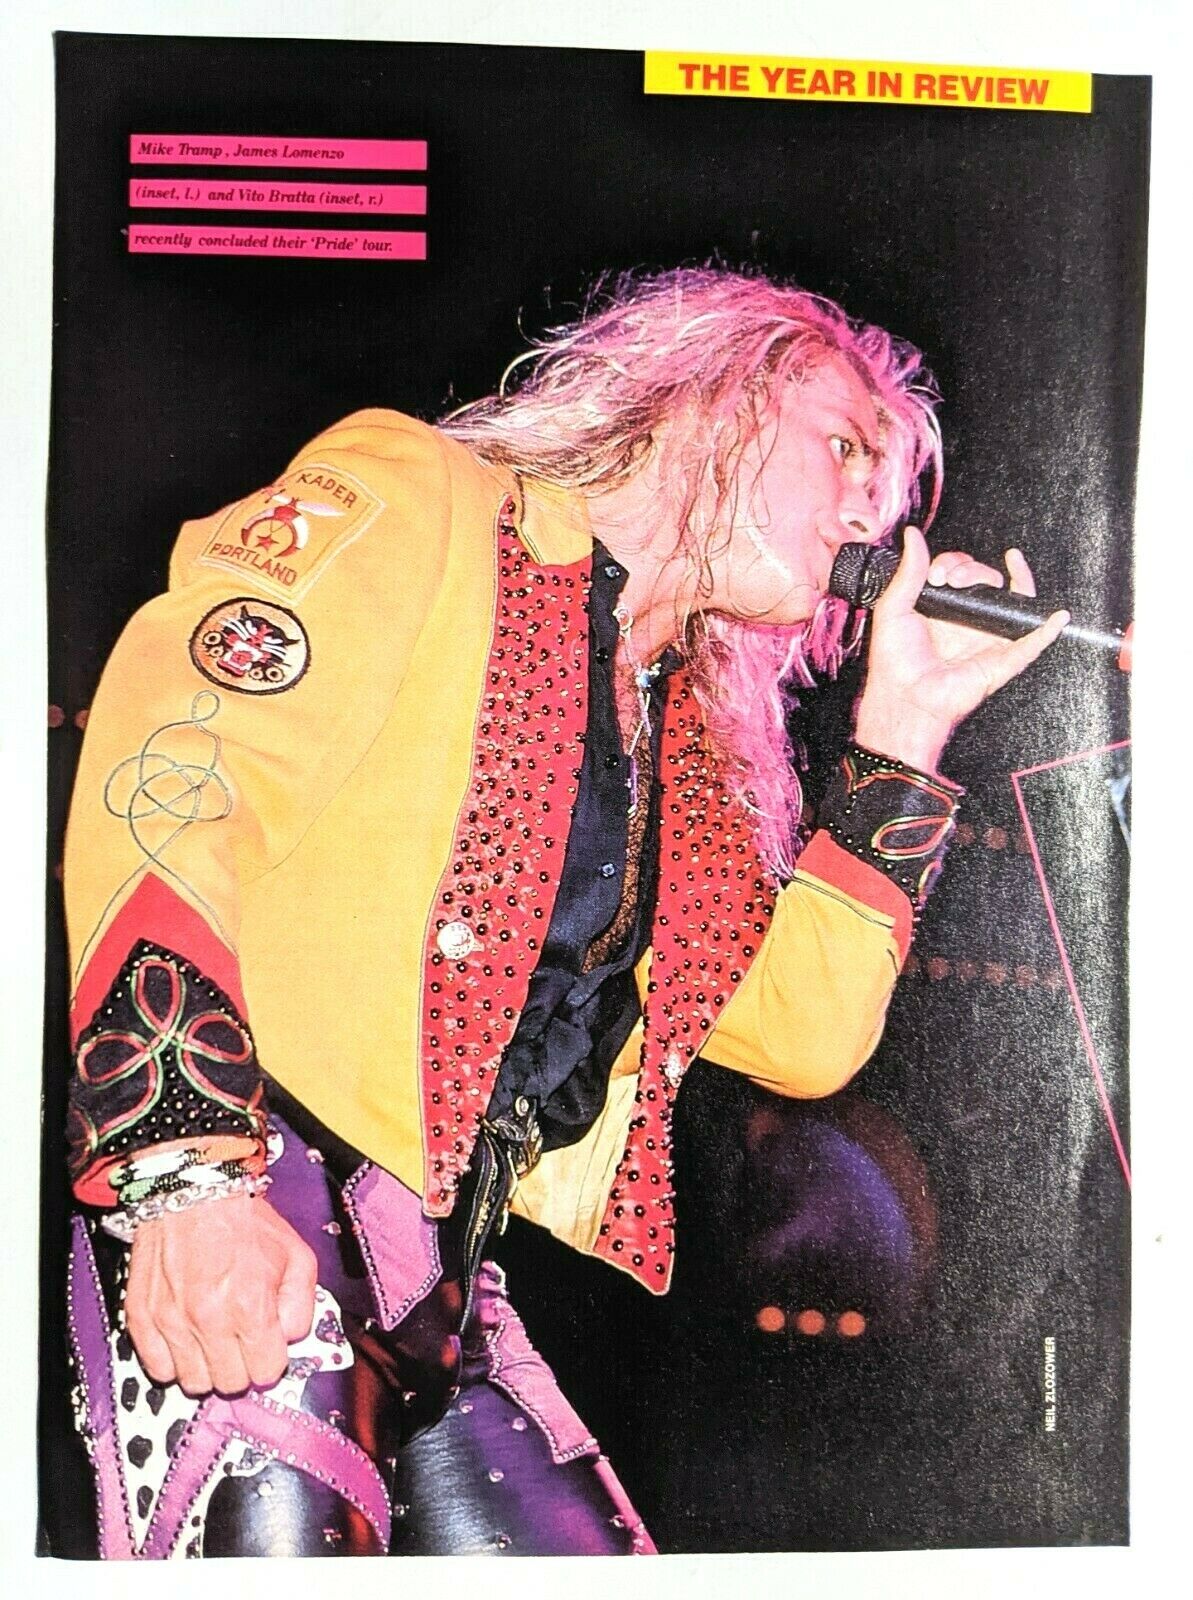 White Lion / Mike Tramp Live / Magazine Full Page Pinup Poster Clipping (3)